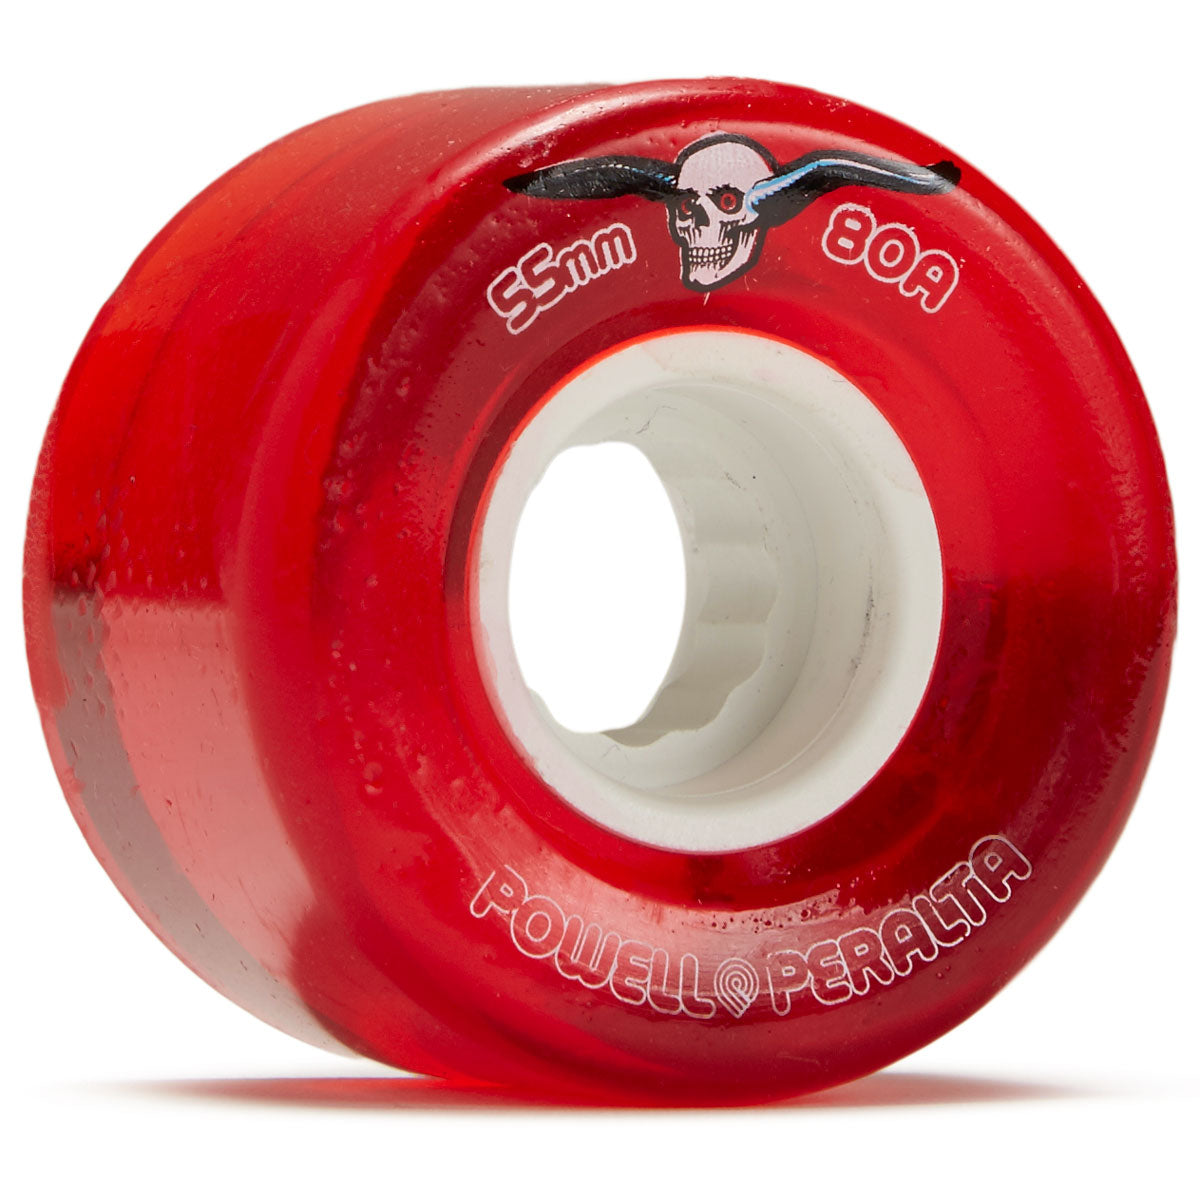 Powell-Peralta Clear Cruisers 80A Skateboard Wheels - Red - 55mm